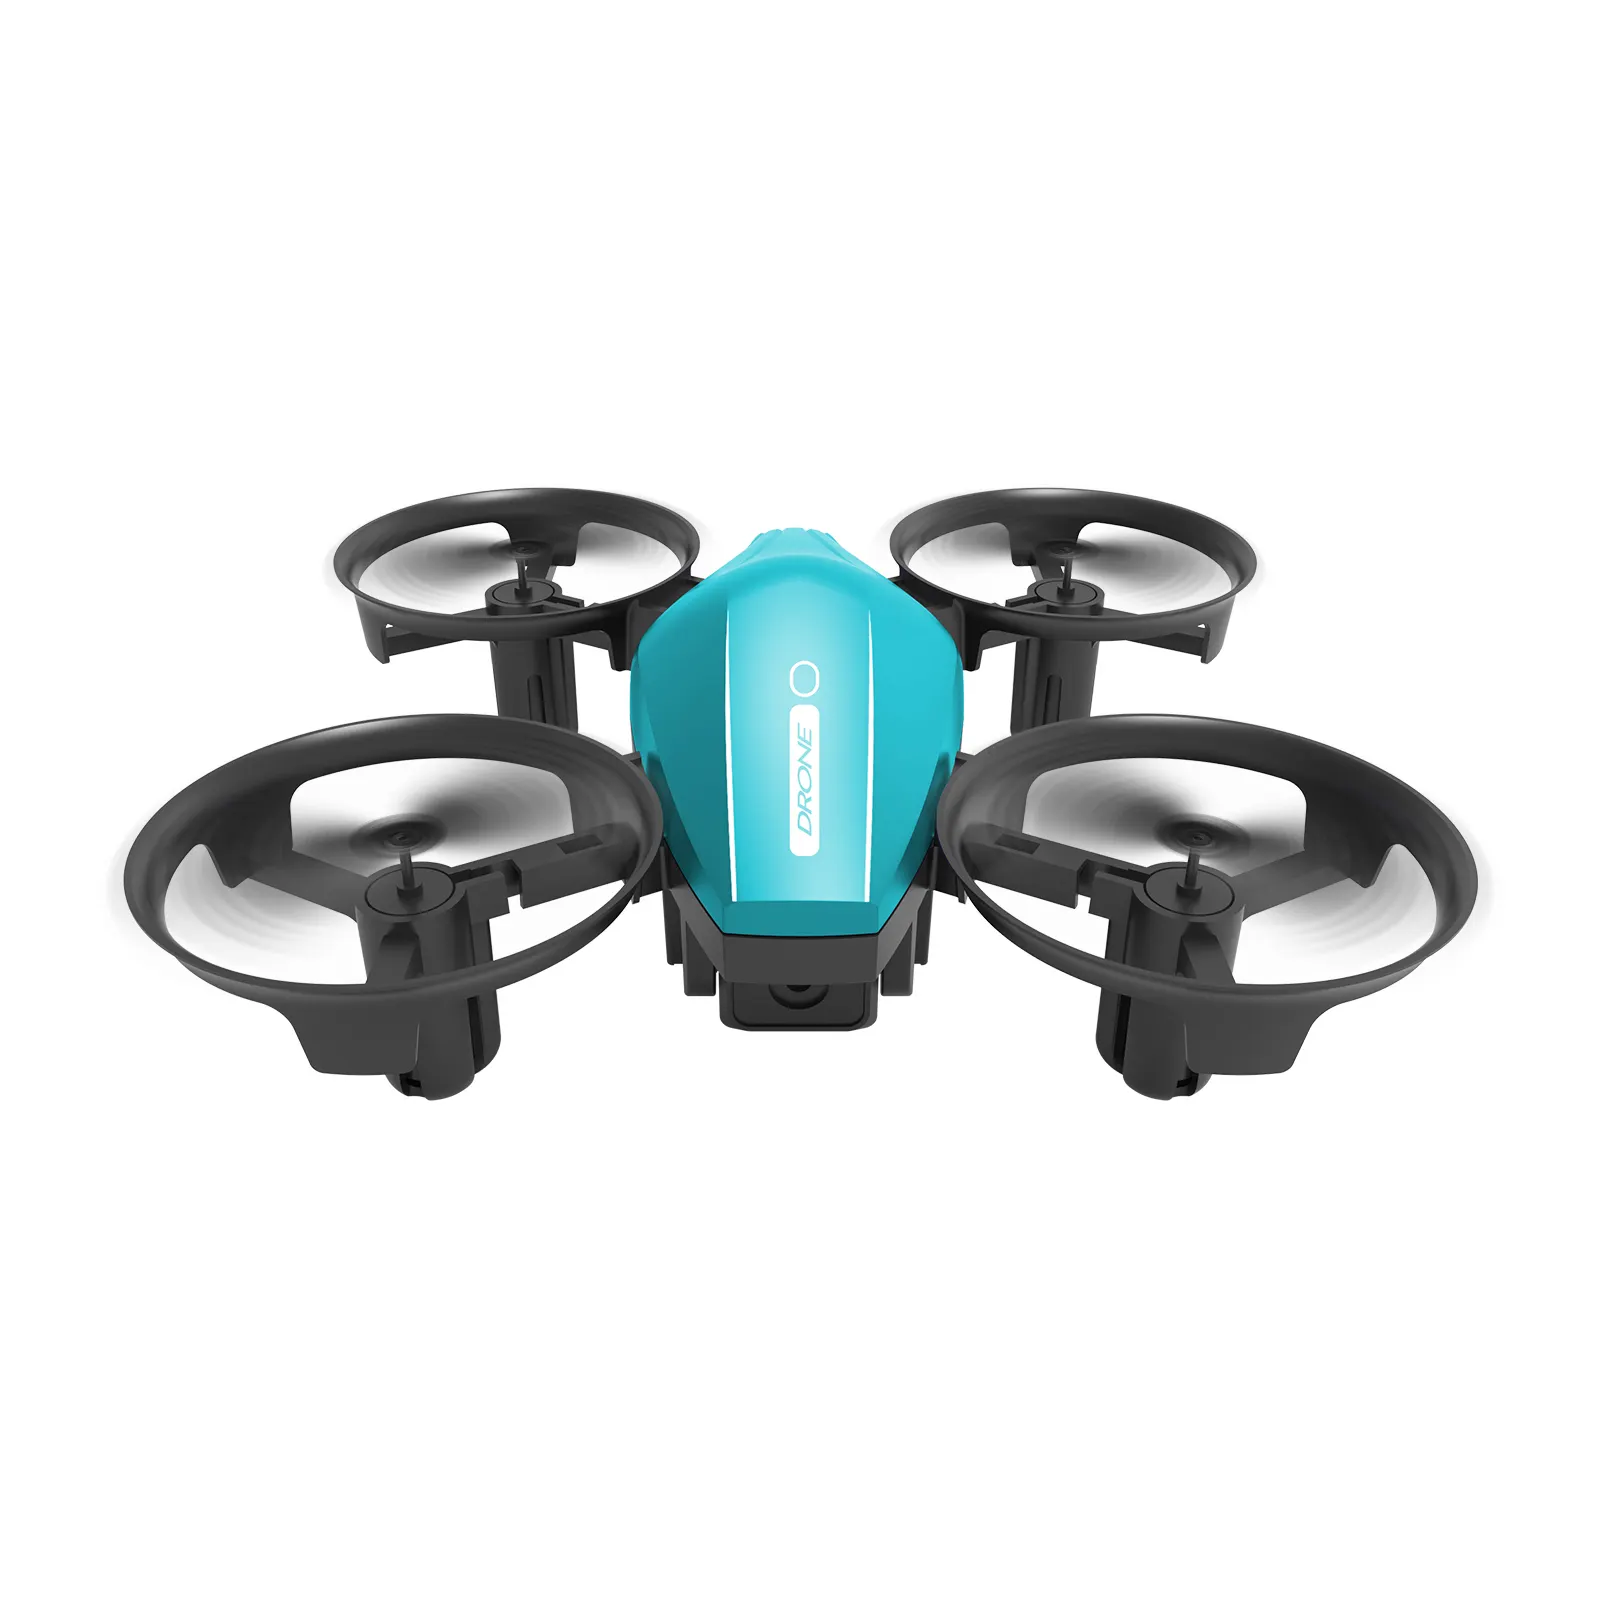 Sky Fly JHD GT1 Mini Drone 360 Air Rolling with Blade Protection 2.4G Quadcopter Children's Remote Control Airplane Toys Gift